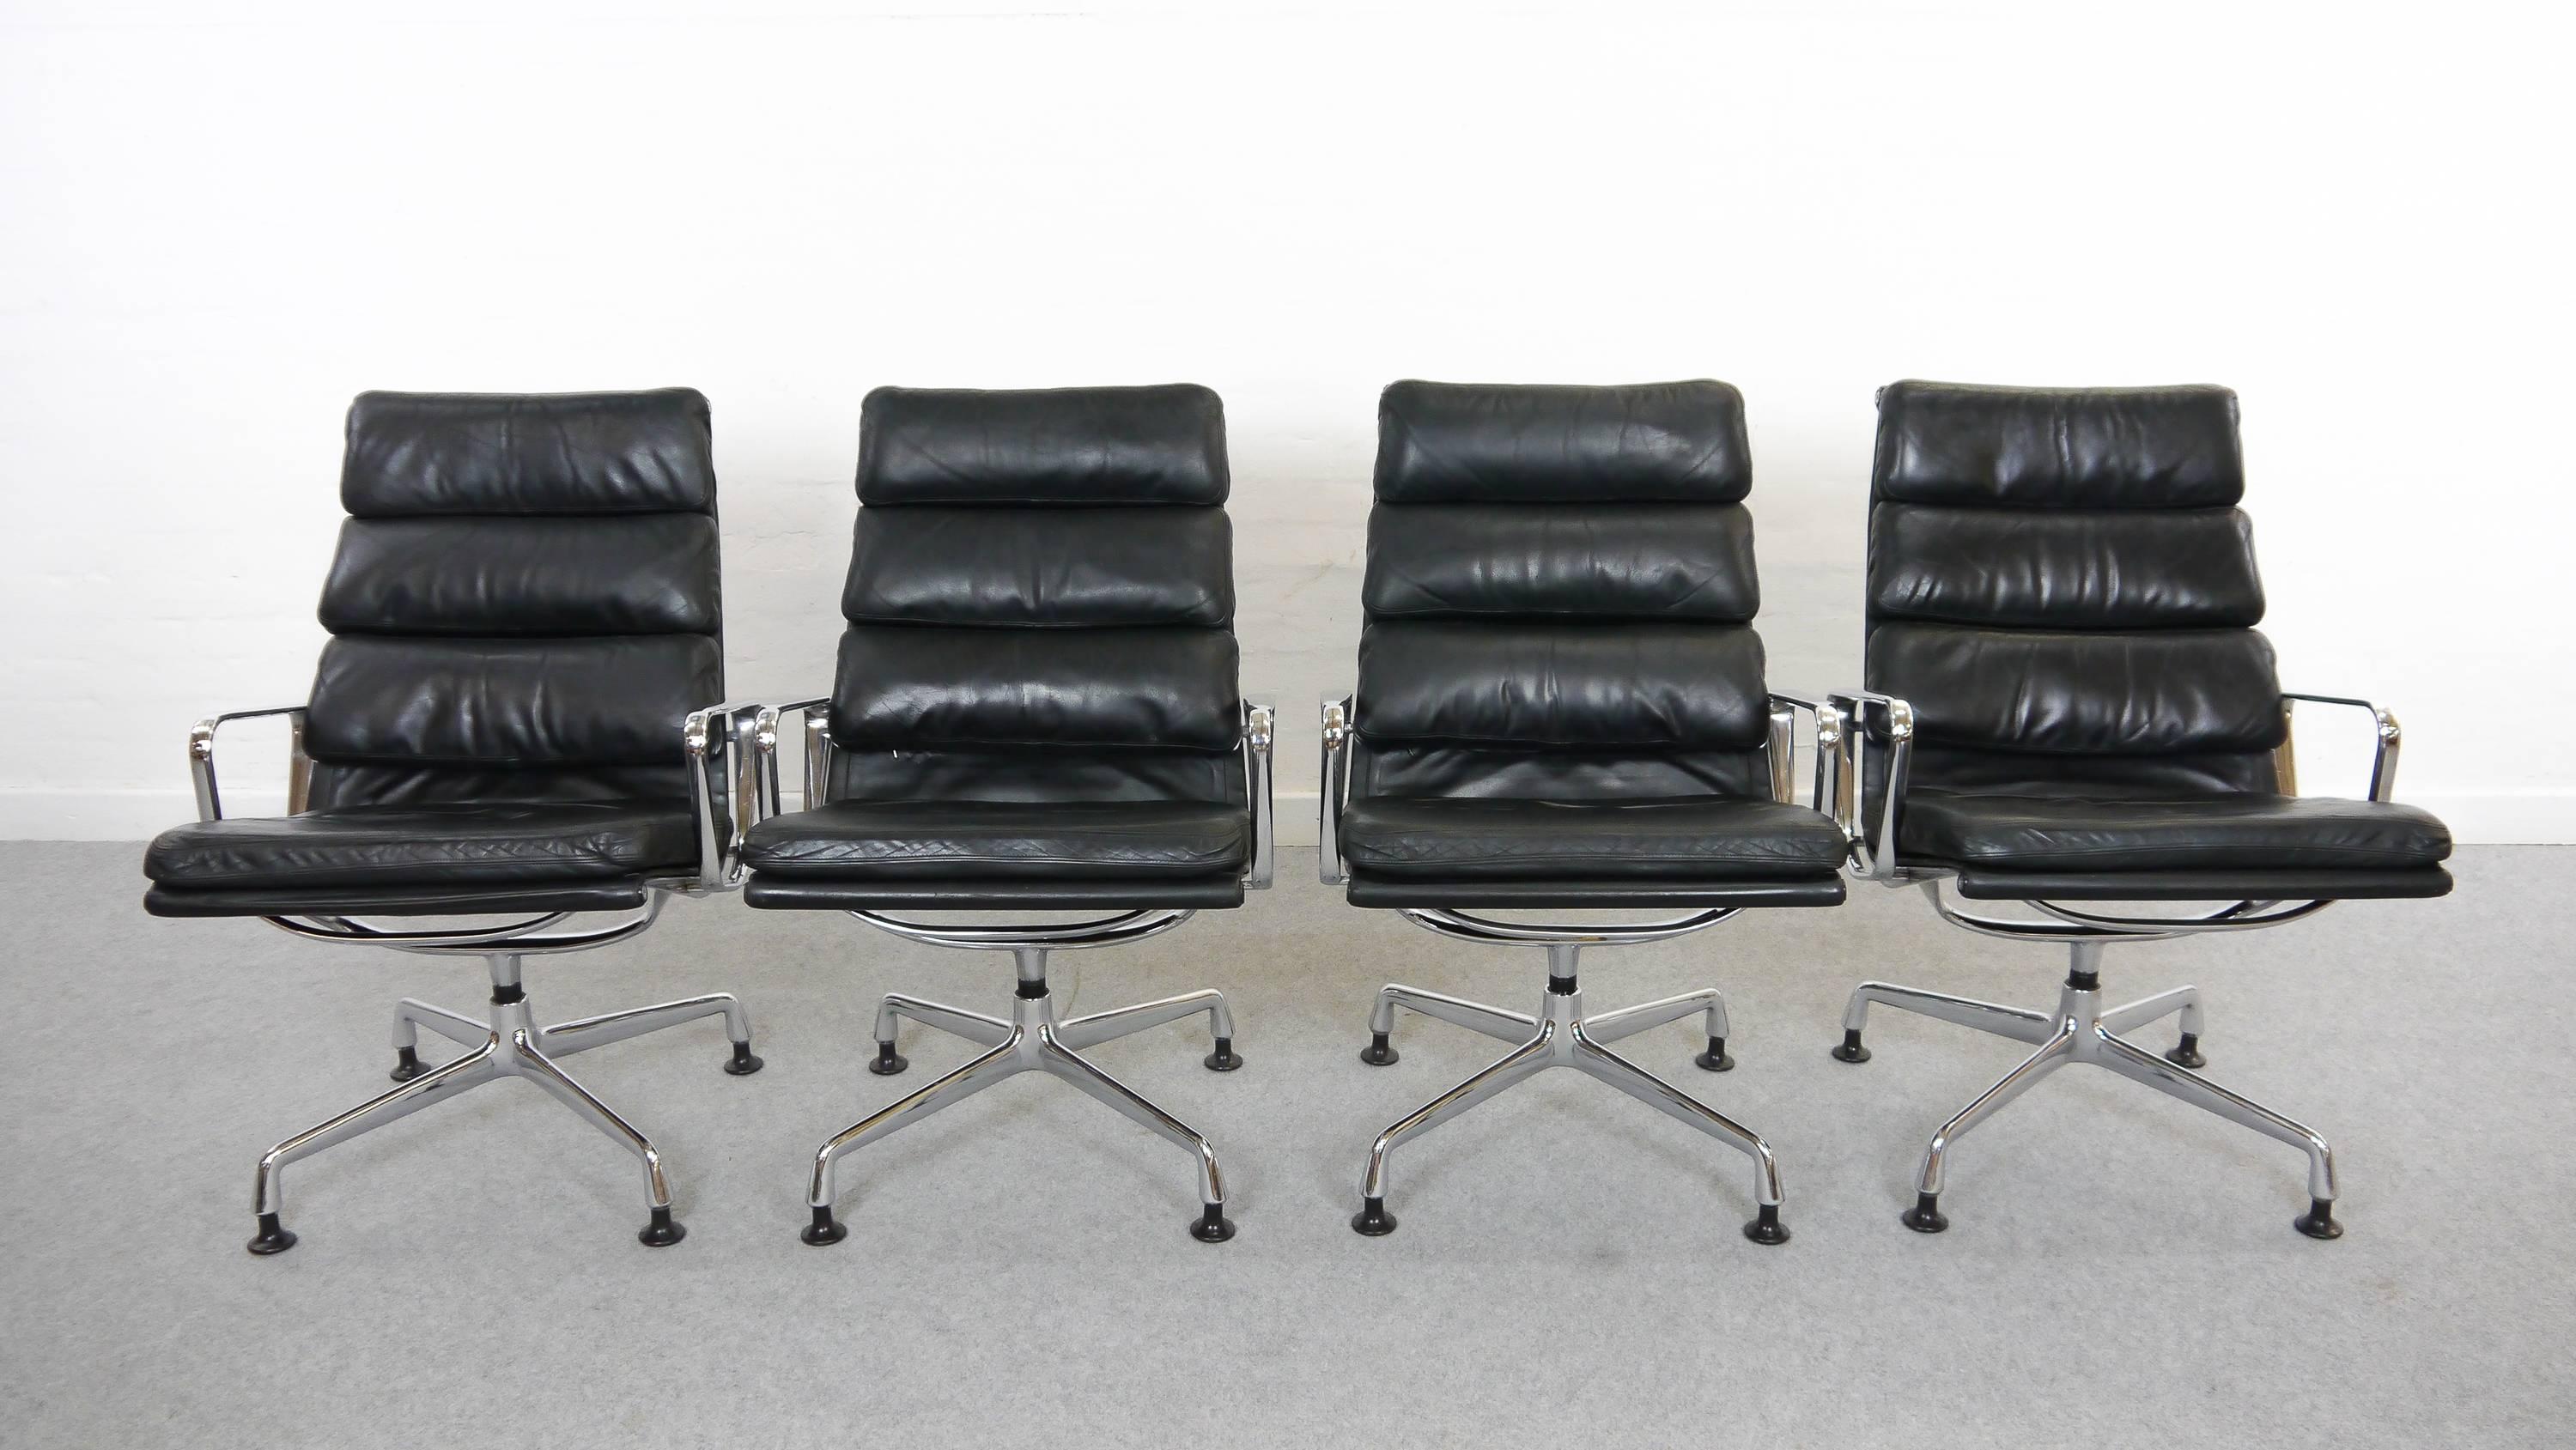 Vintage set of four easy chairs EA 216 soft pad. Manufactured by Herman Miller / Fehlbaum, Germany. Original black leather upholstery. Embossed Herman Miller Logo. One chair has a rest-label of the early Miller Logo. These swivel-chairs are very